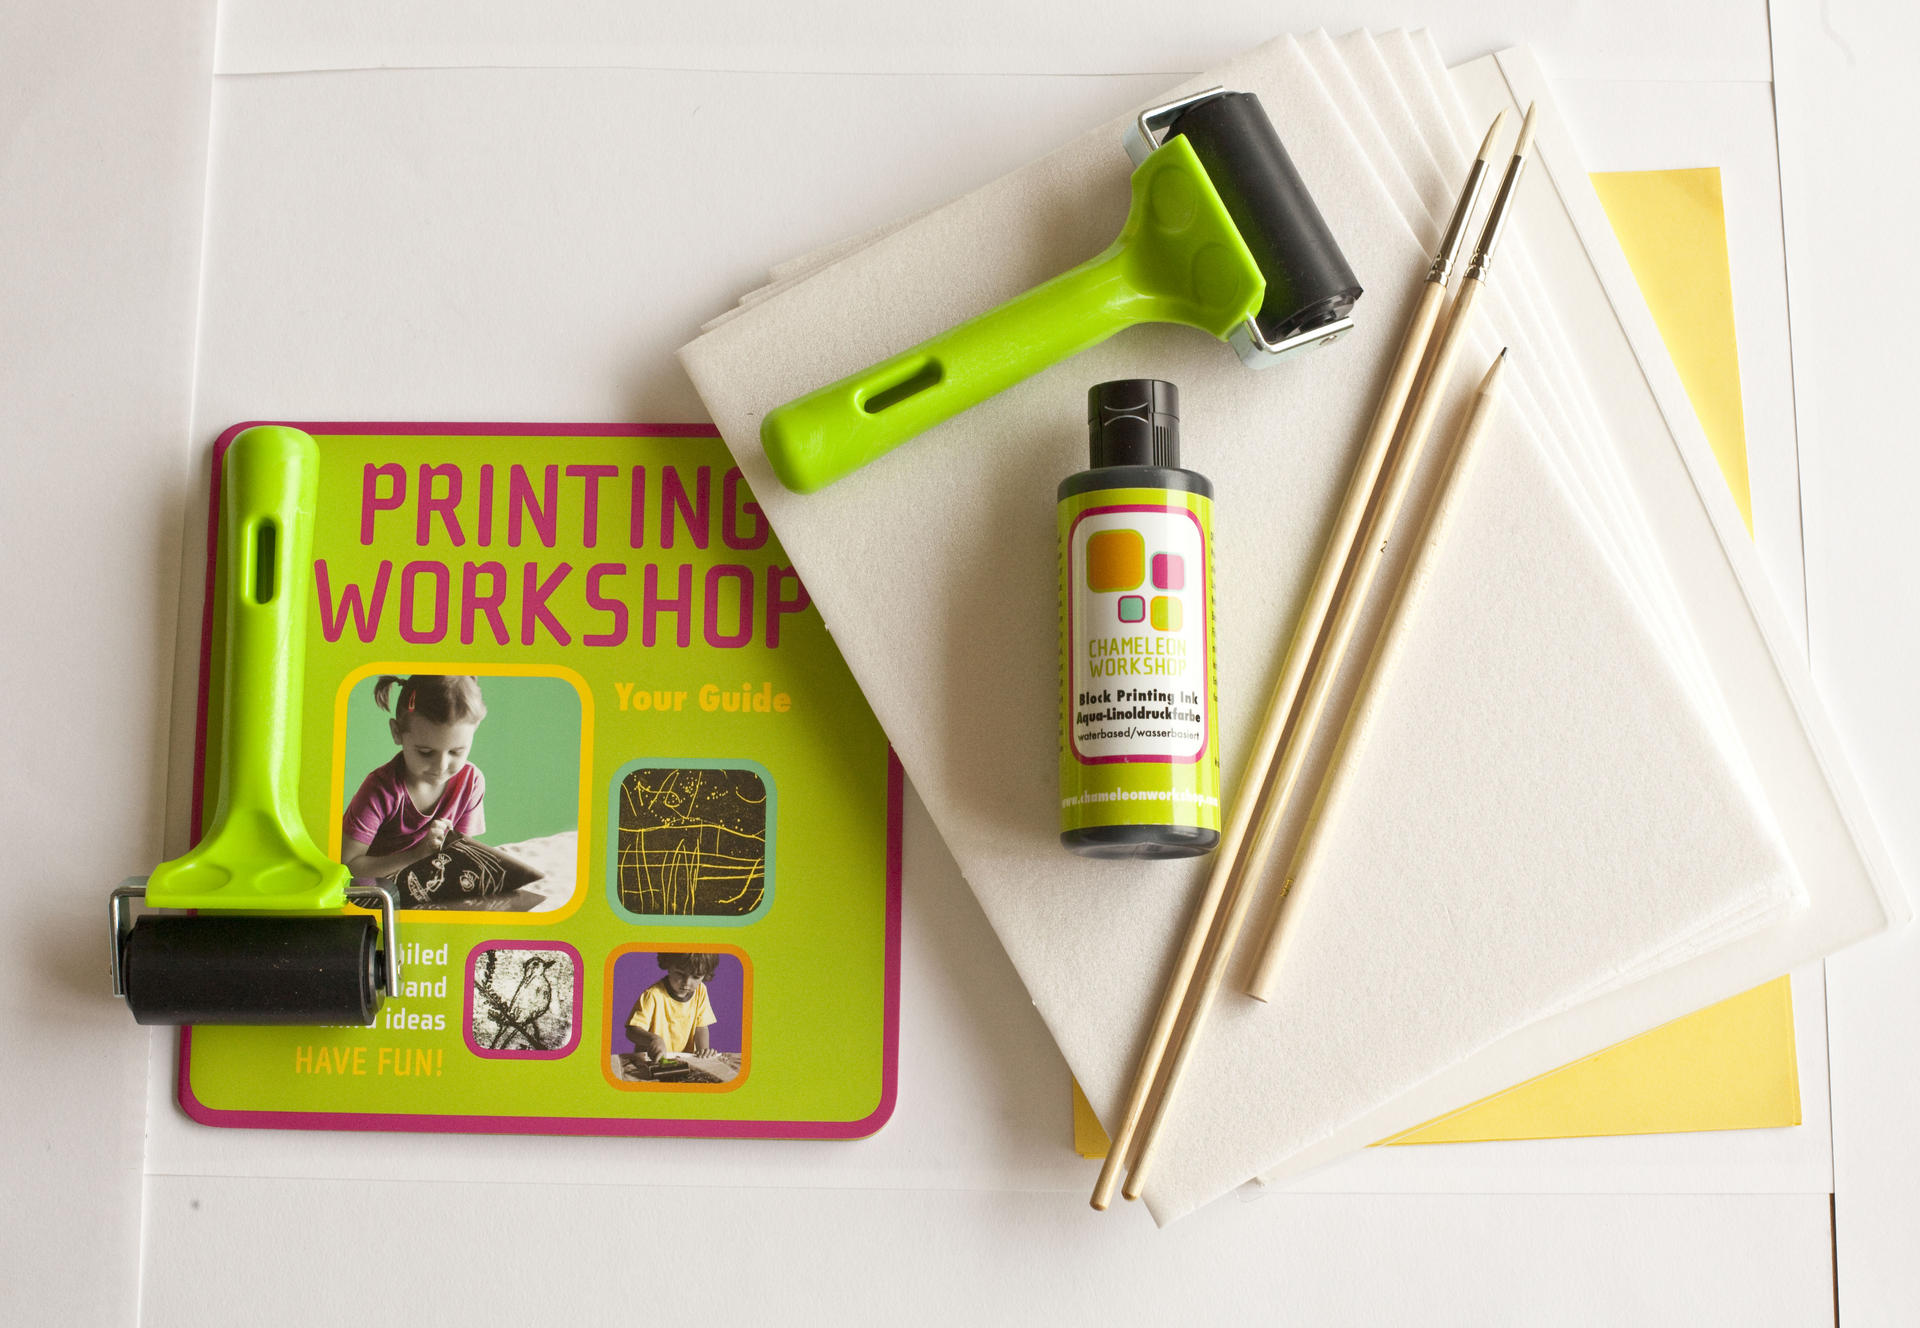 The printmaking pack is ideal for rainy days.